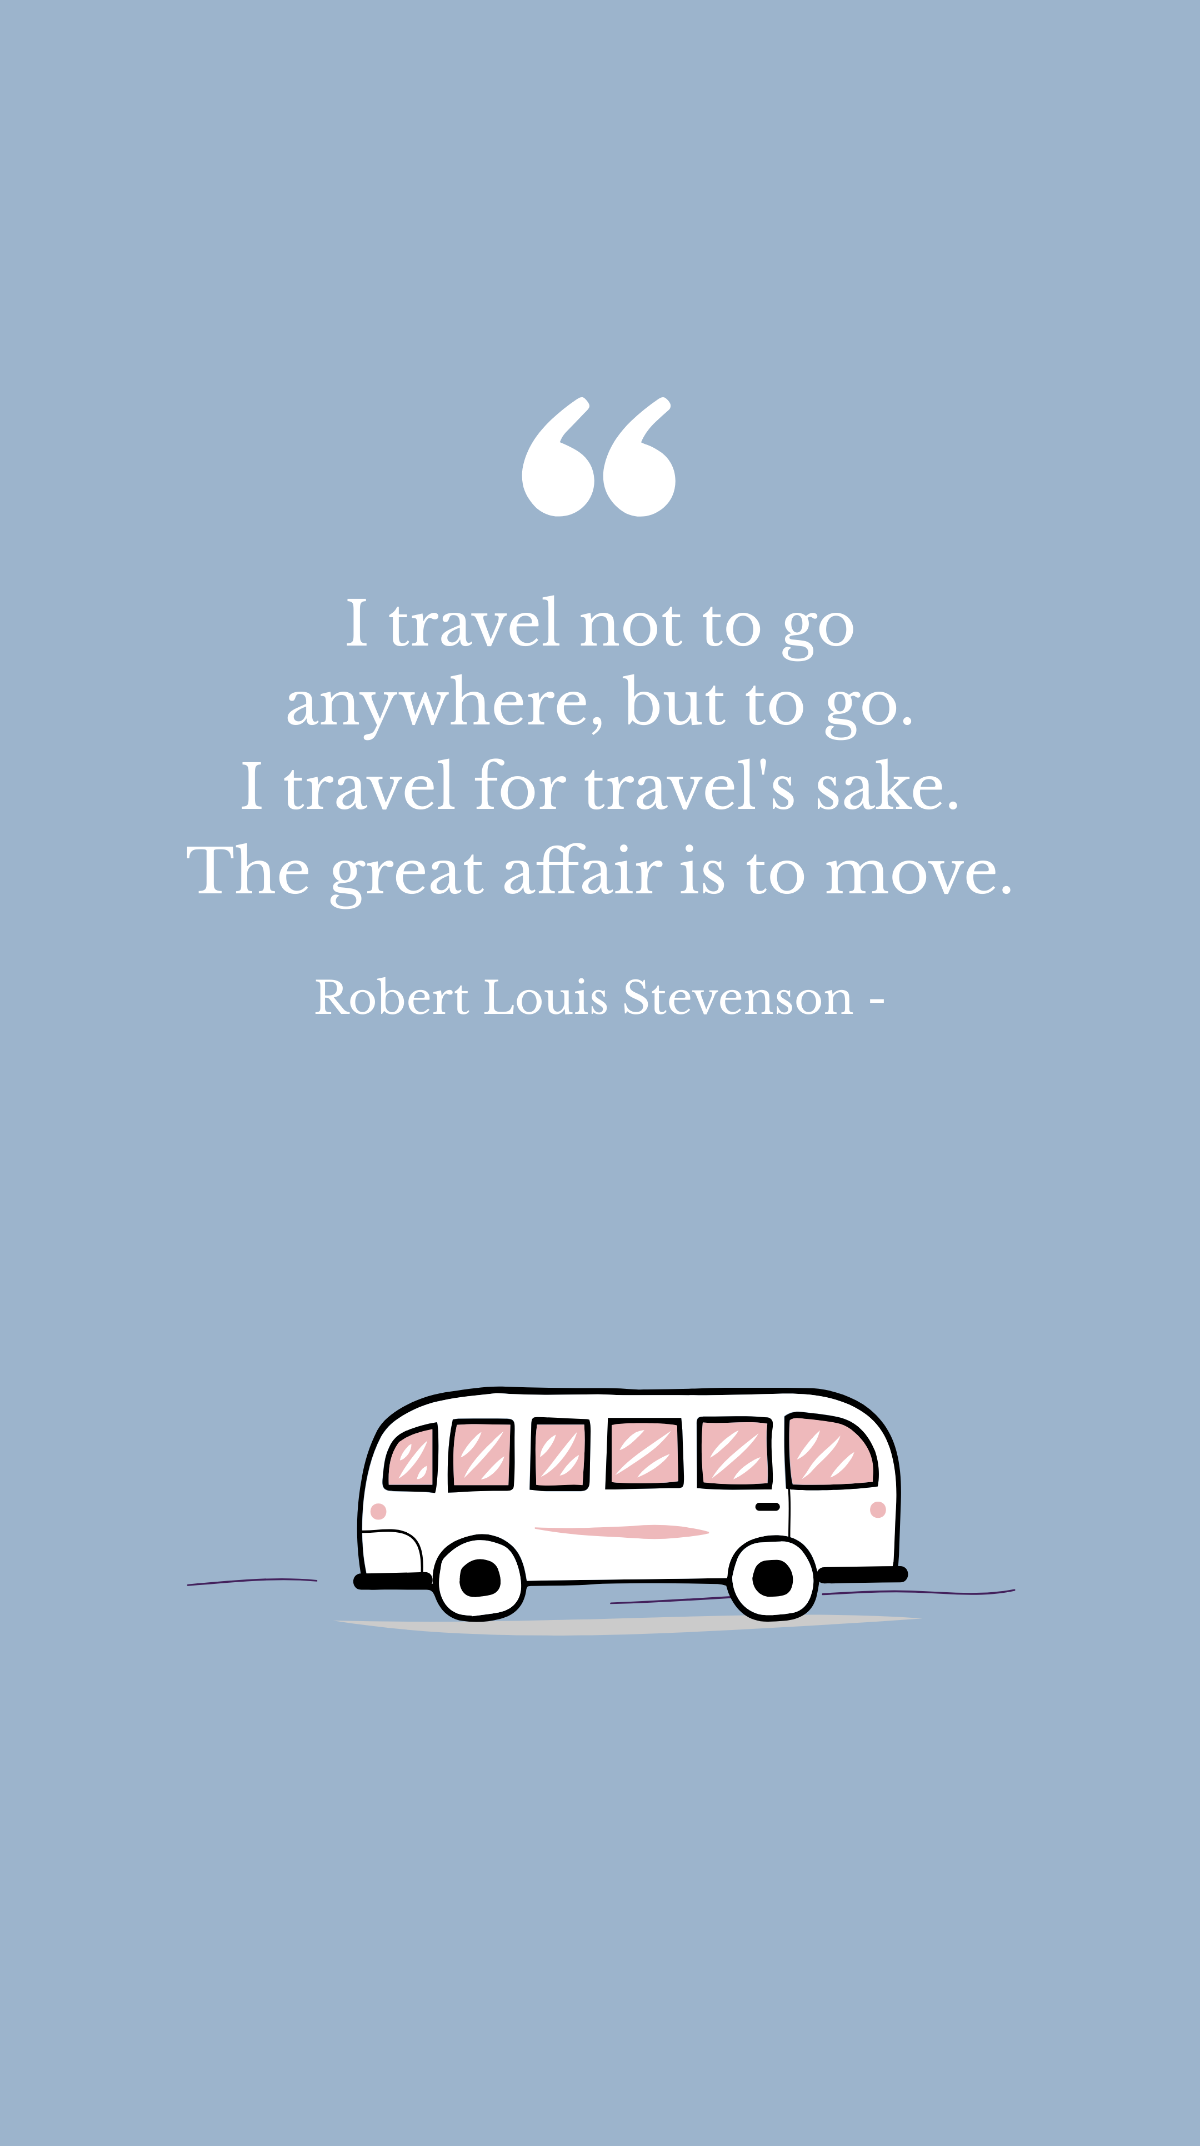 Free Robert Louis Stevenson - I travel not to go anywhere, but to go. I travel for travel's sake. The great affair is to move. Template